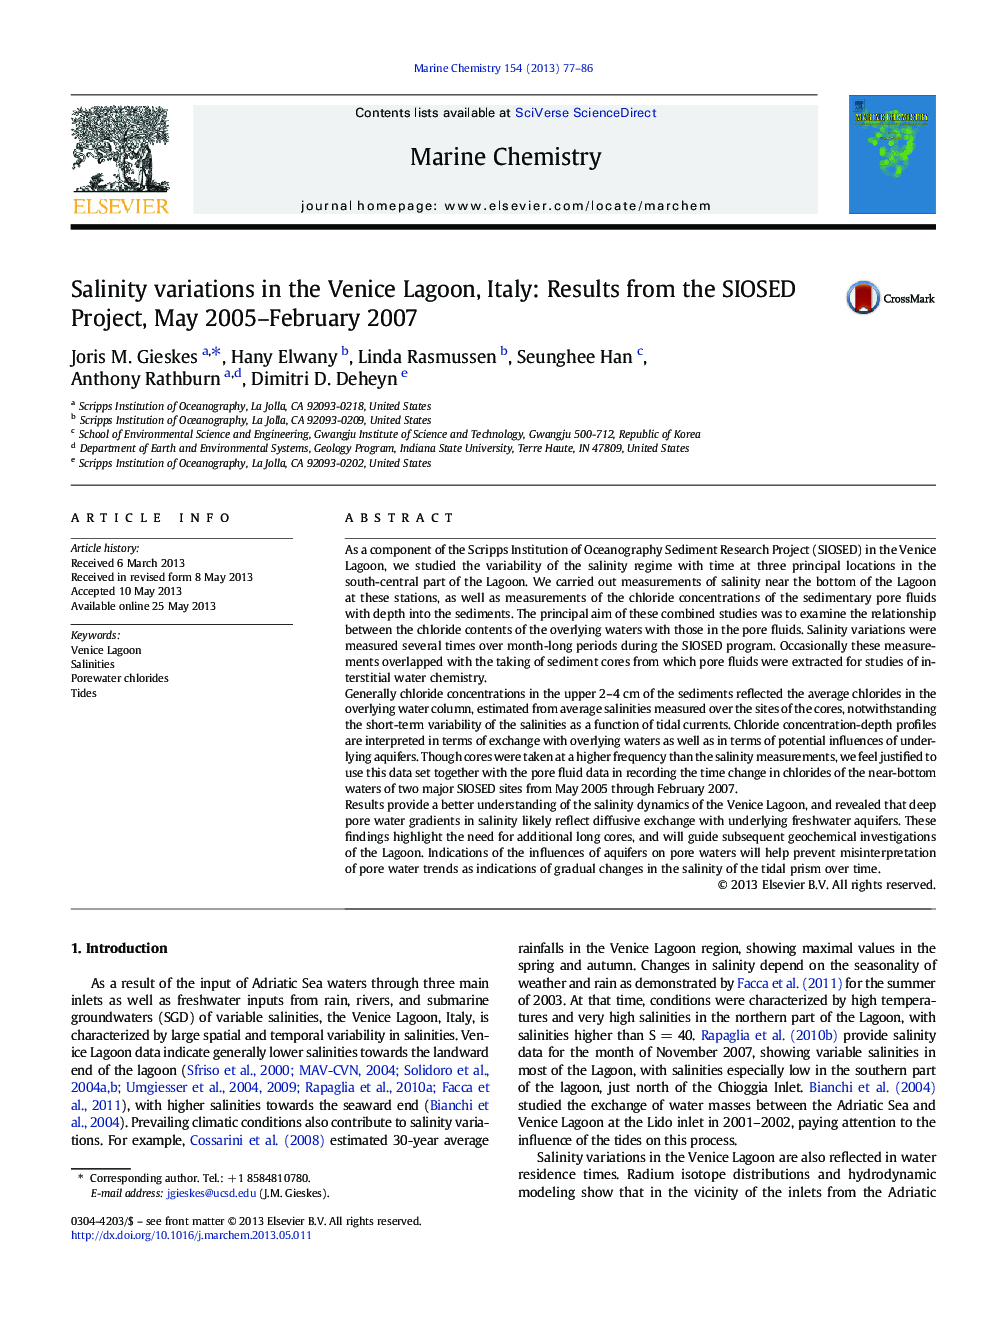 Salinity variations in the Venice Lagoon, Italy: Results from the SIOSED Project, May 2005–February 2007